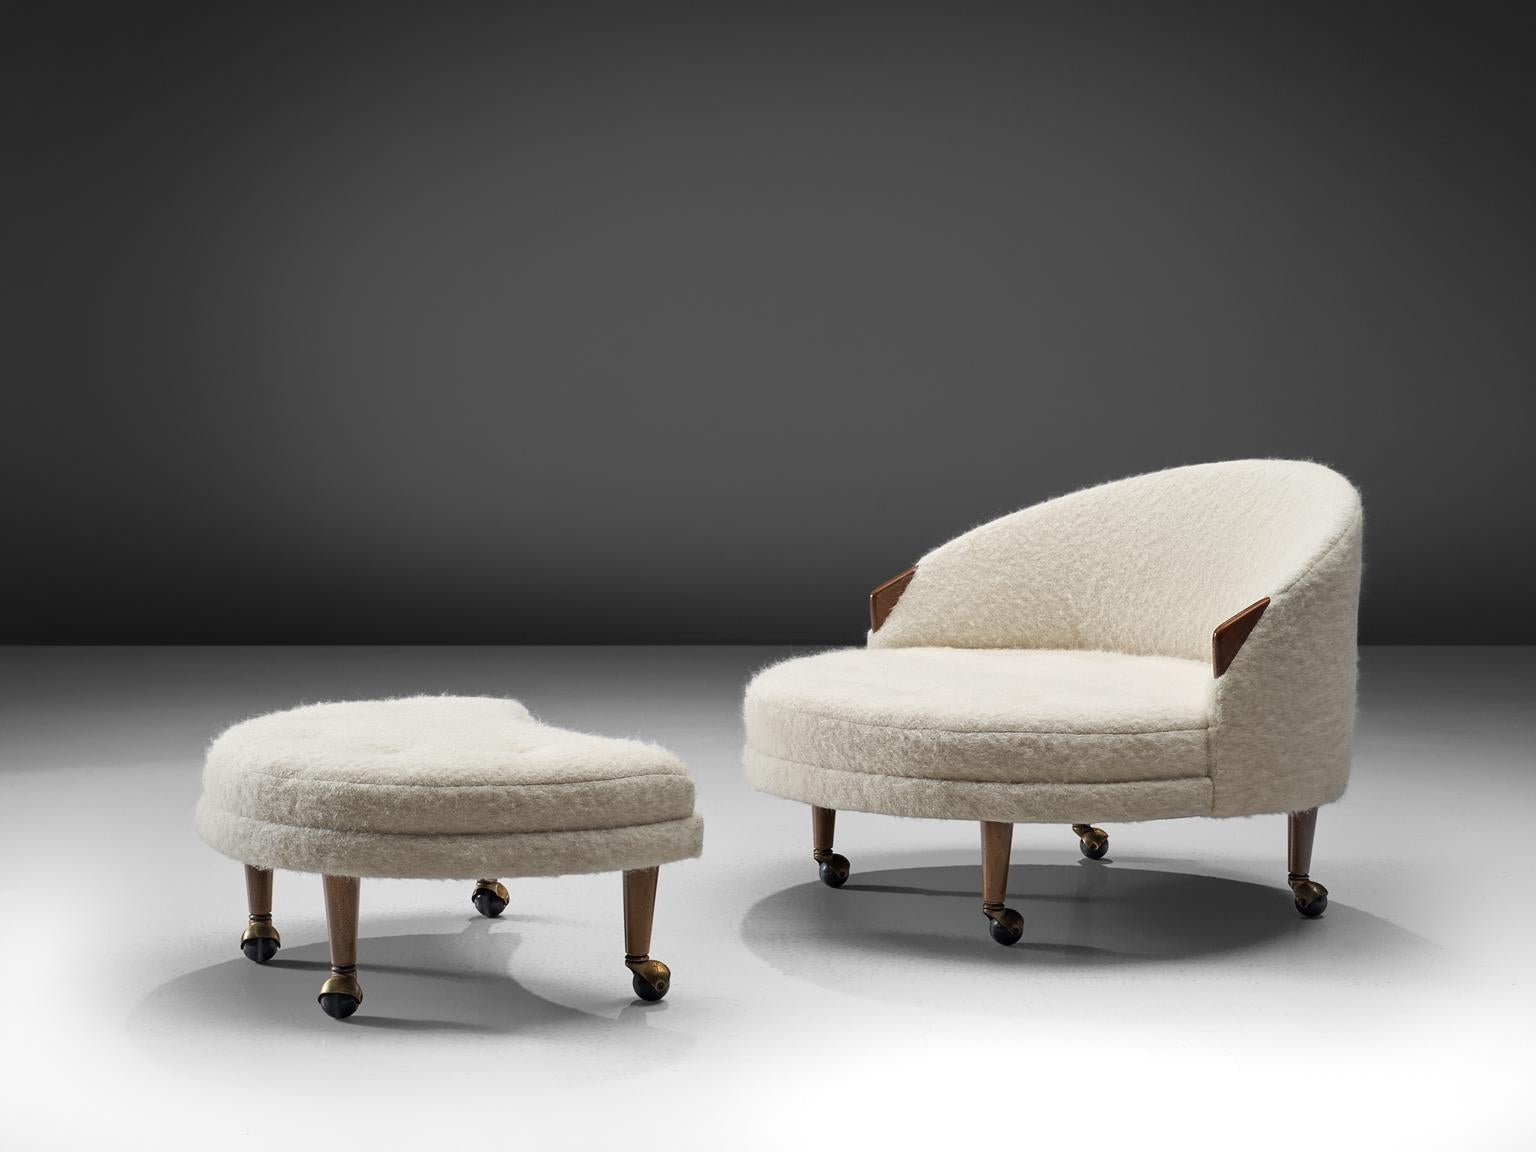 Adrian Pearsall for Craft Associates, 'Havana' lounge chair and ottoman, walnut and Pierre Frey woollen upholstery with walnut, United States, 1960s.
(This item is meant mainly for the European market.)

This lounge chair and ottoman with small